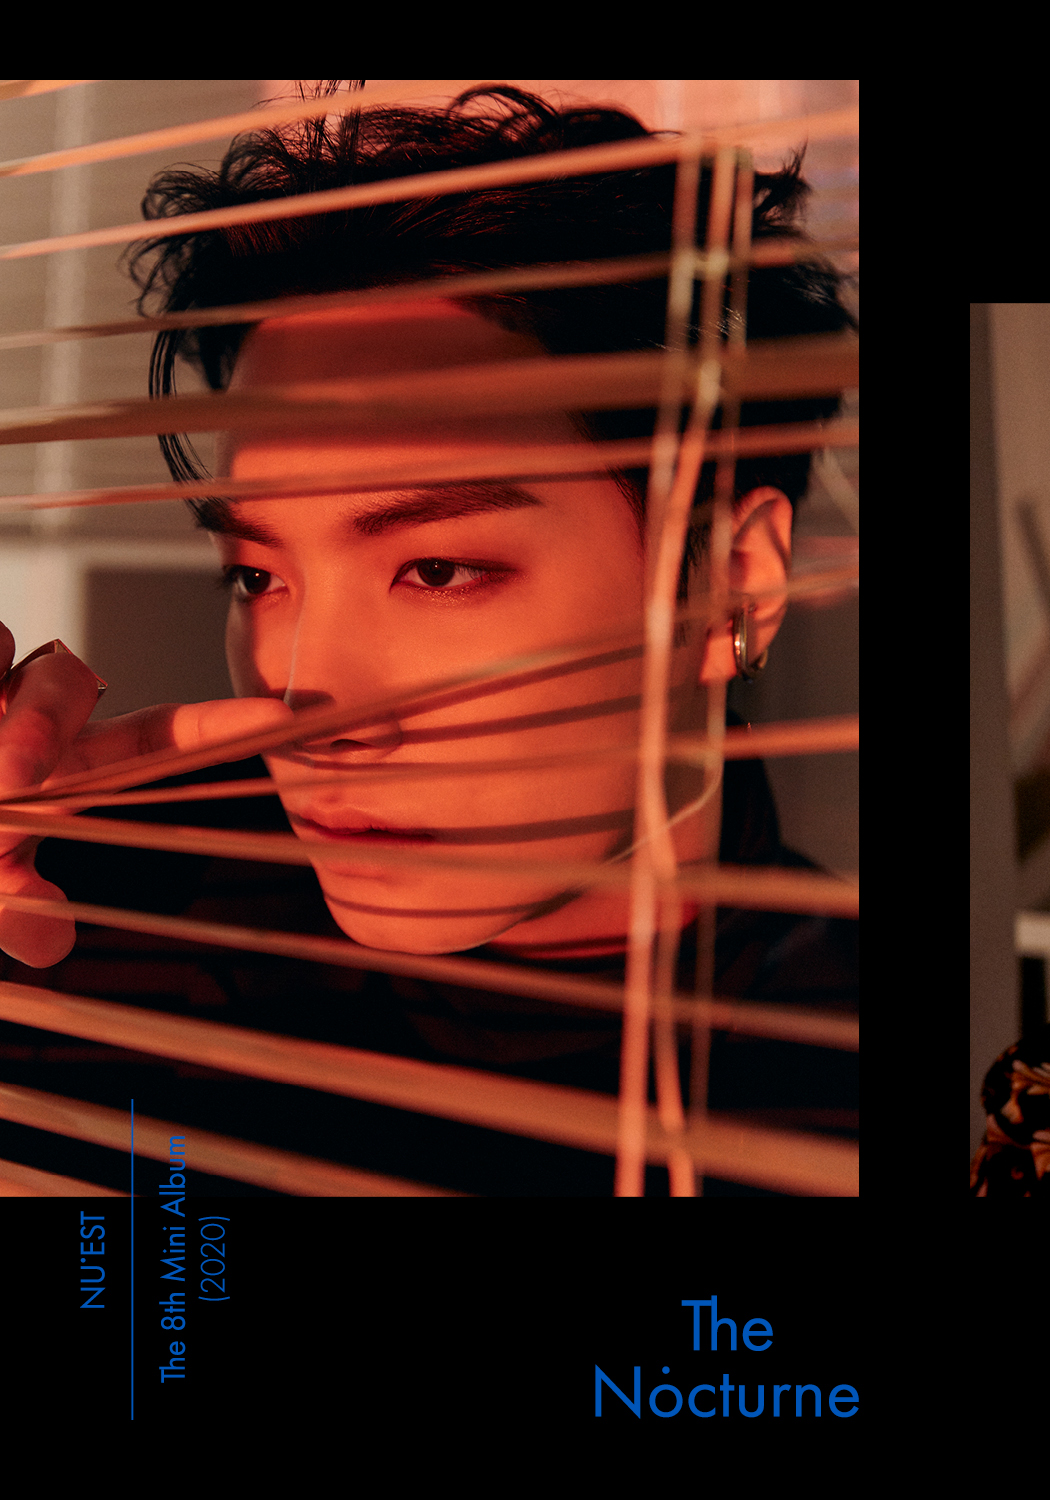 nuest-members-release-the-nocturne-teaser-image-and-trailer-3